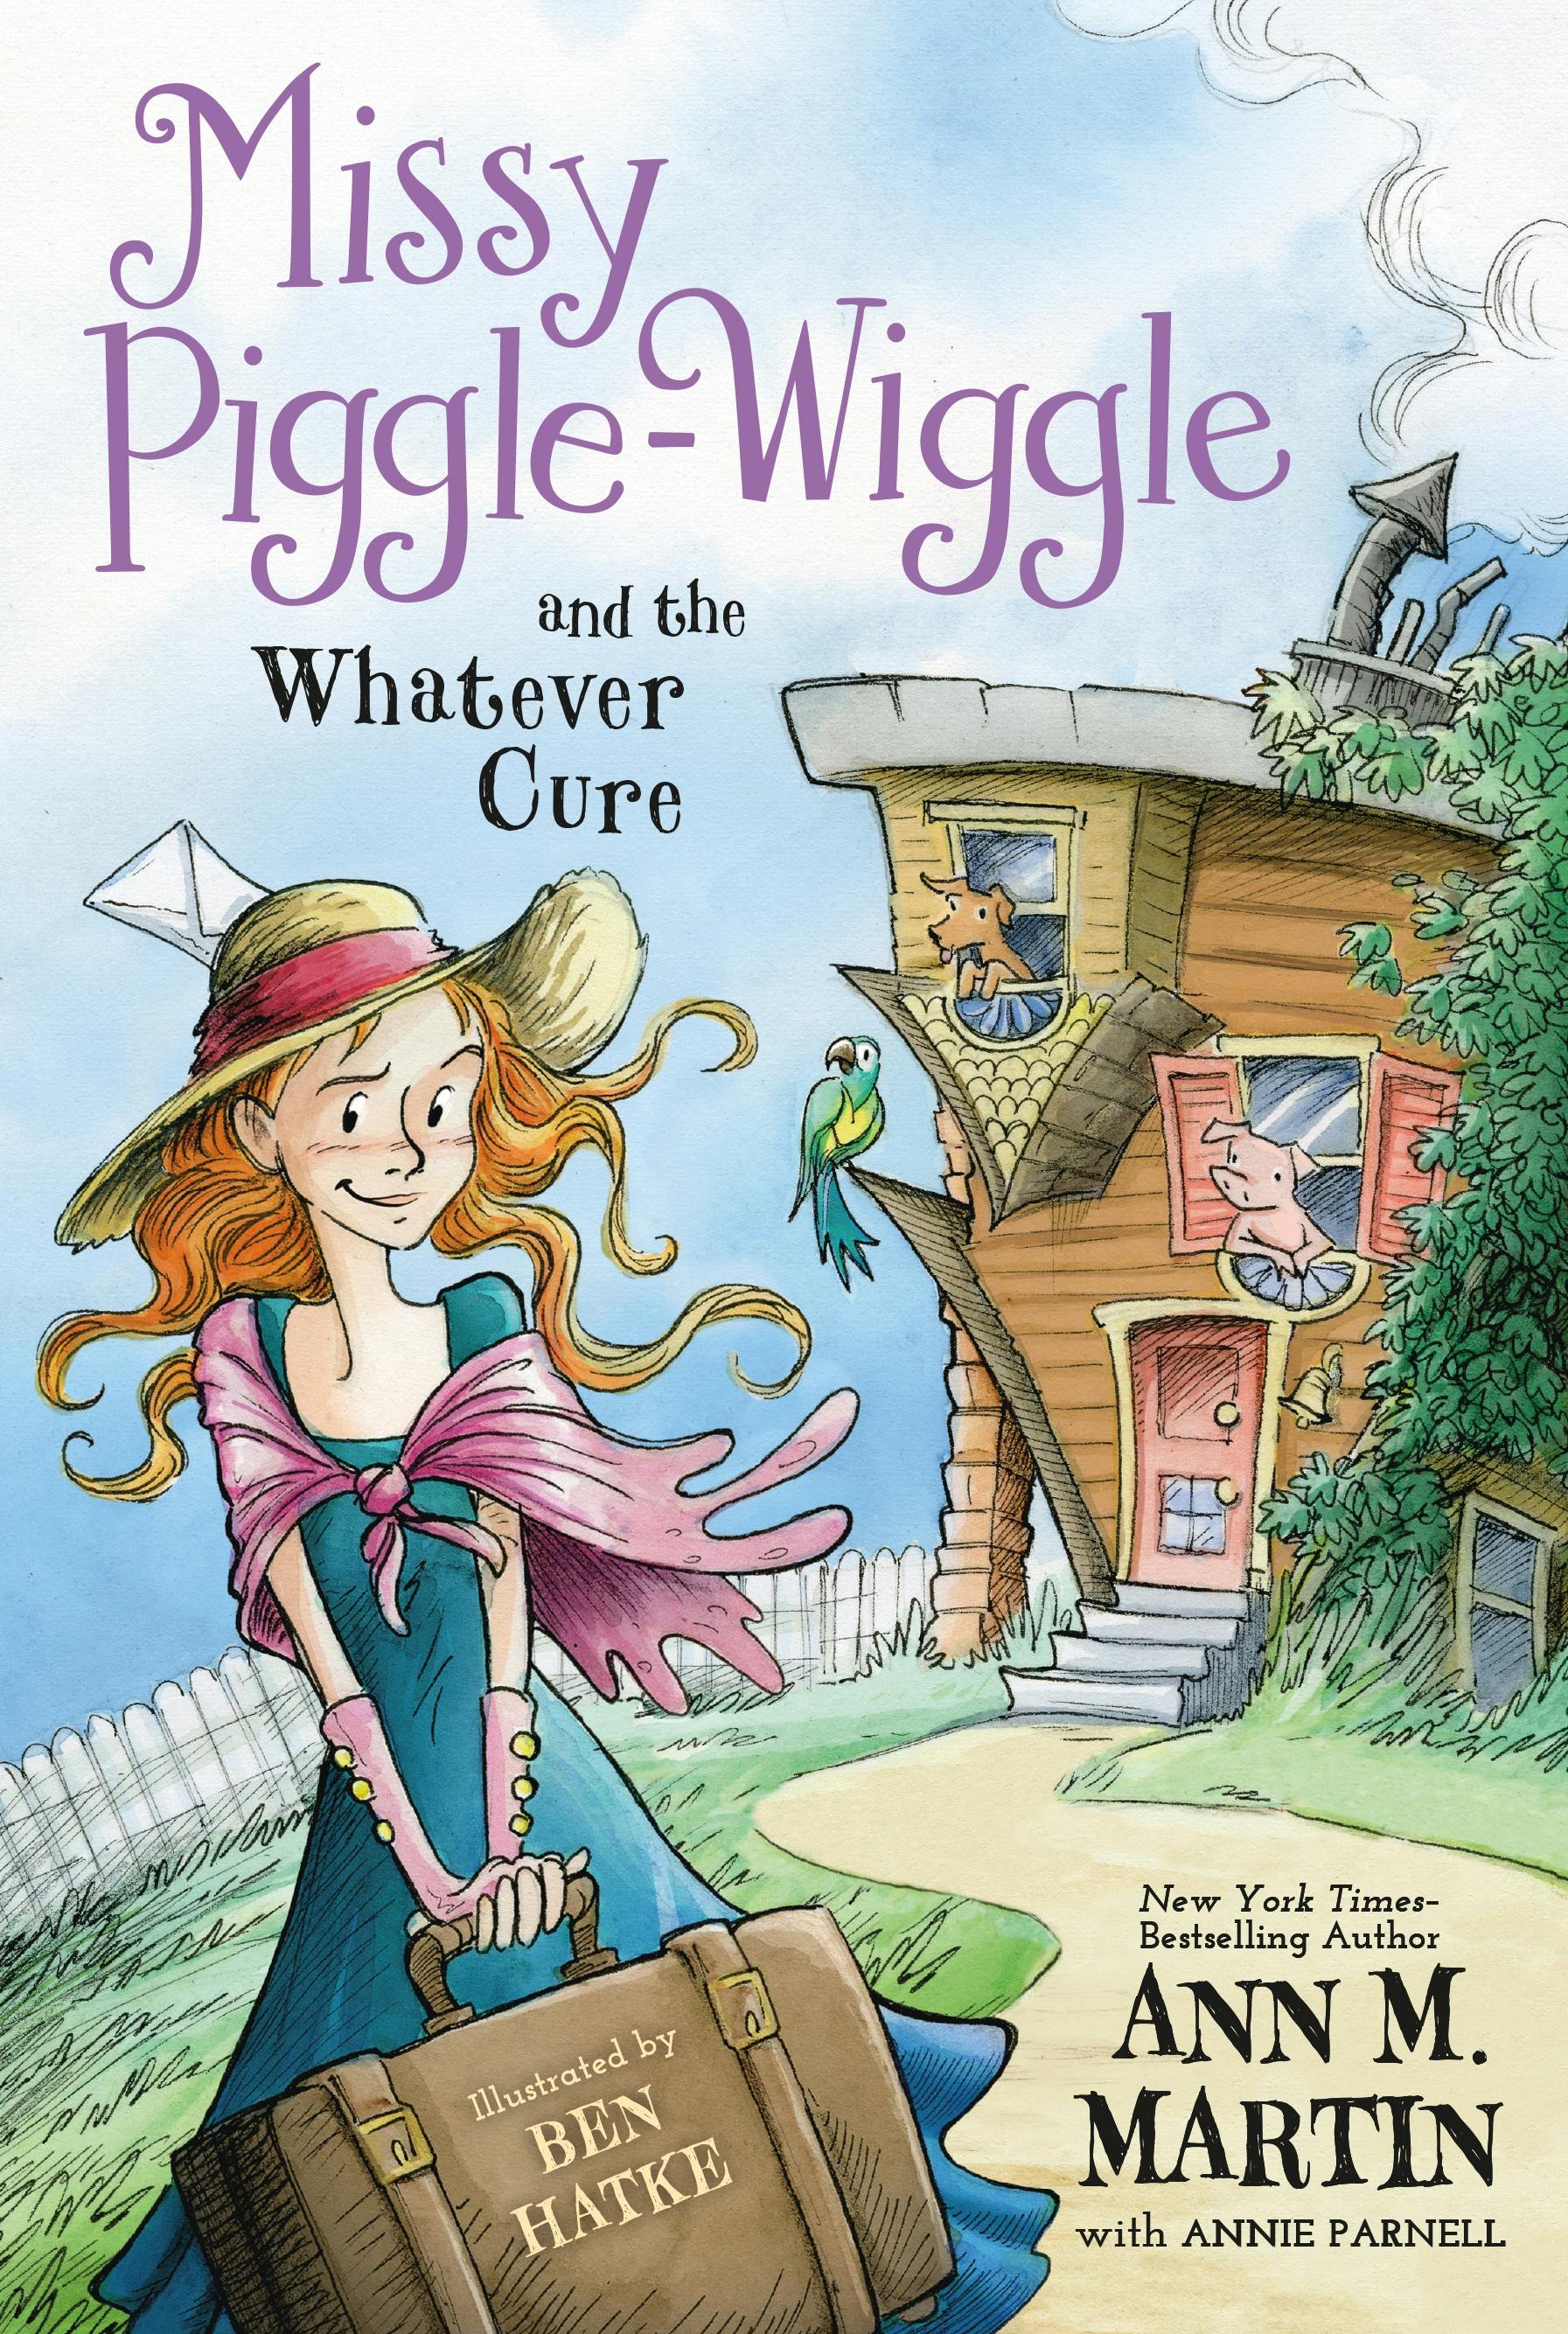 Image of Missy Piggle-Wiggle and the Whatever Cure